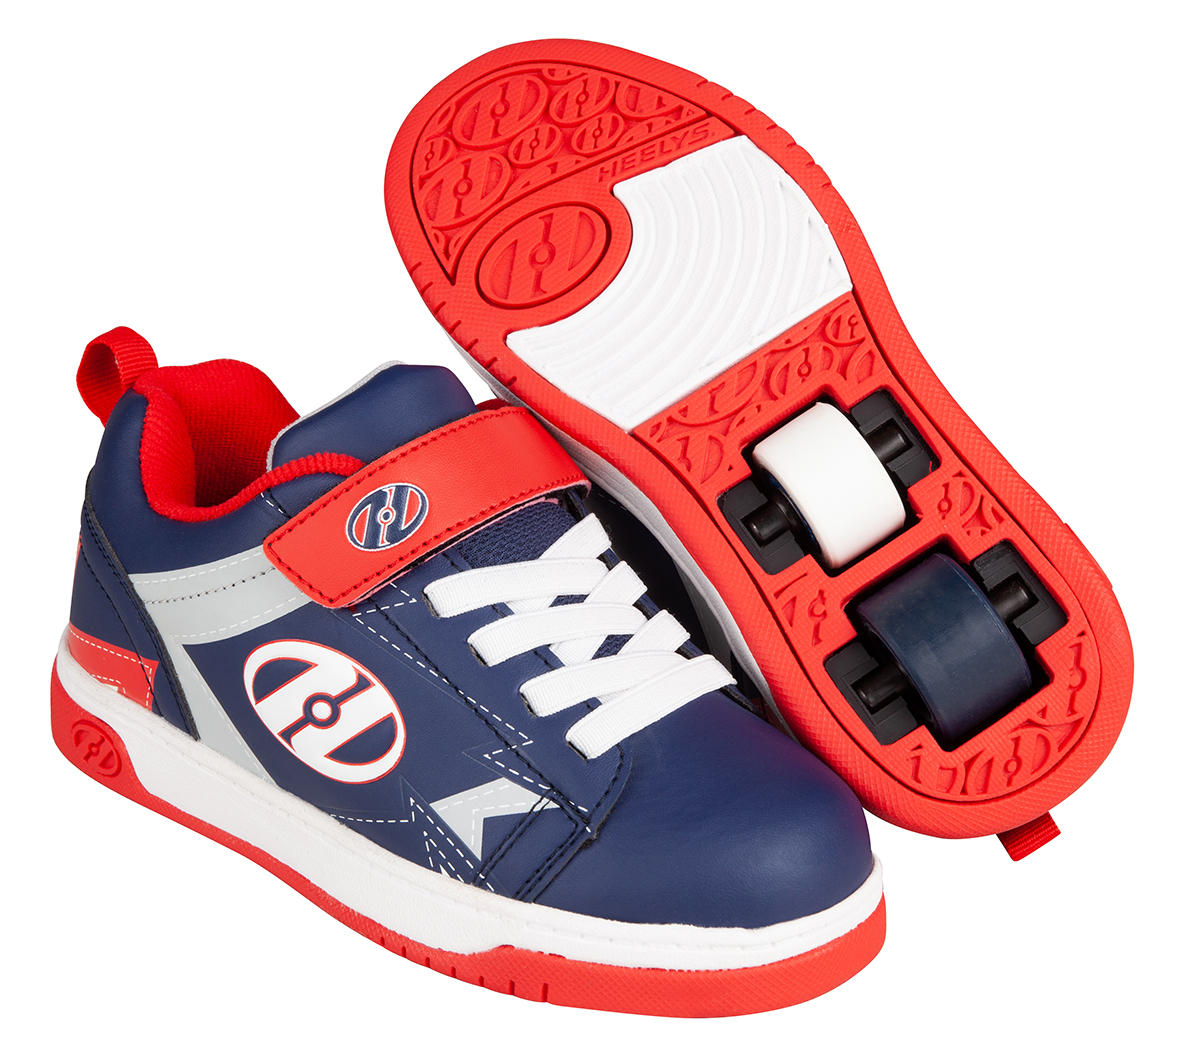 Here's your chance to a pair cool of Heelys - UK Mums TV